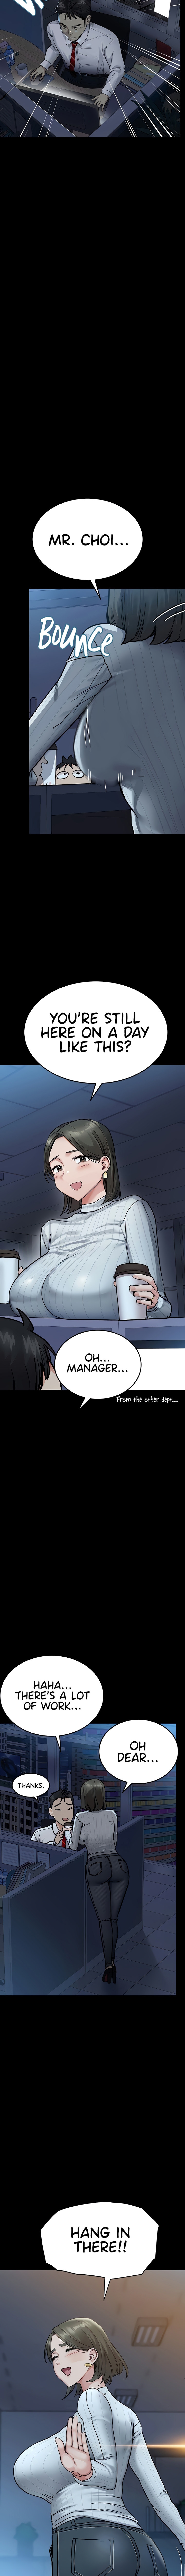 The Story of How I Got Together With The Manager On Christmas - Chapter 0 Page 3